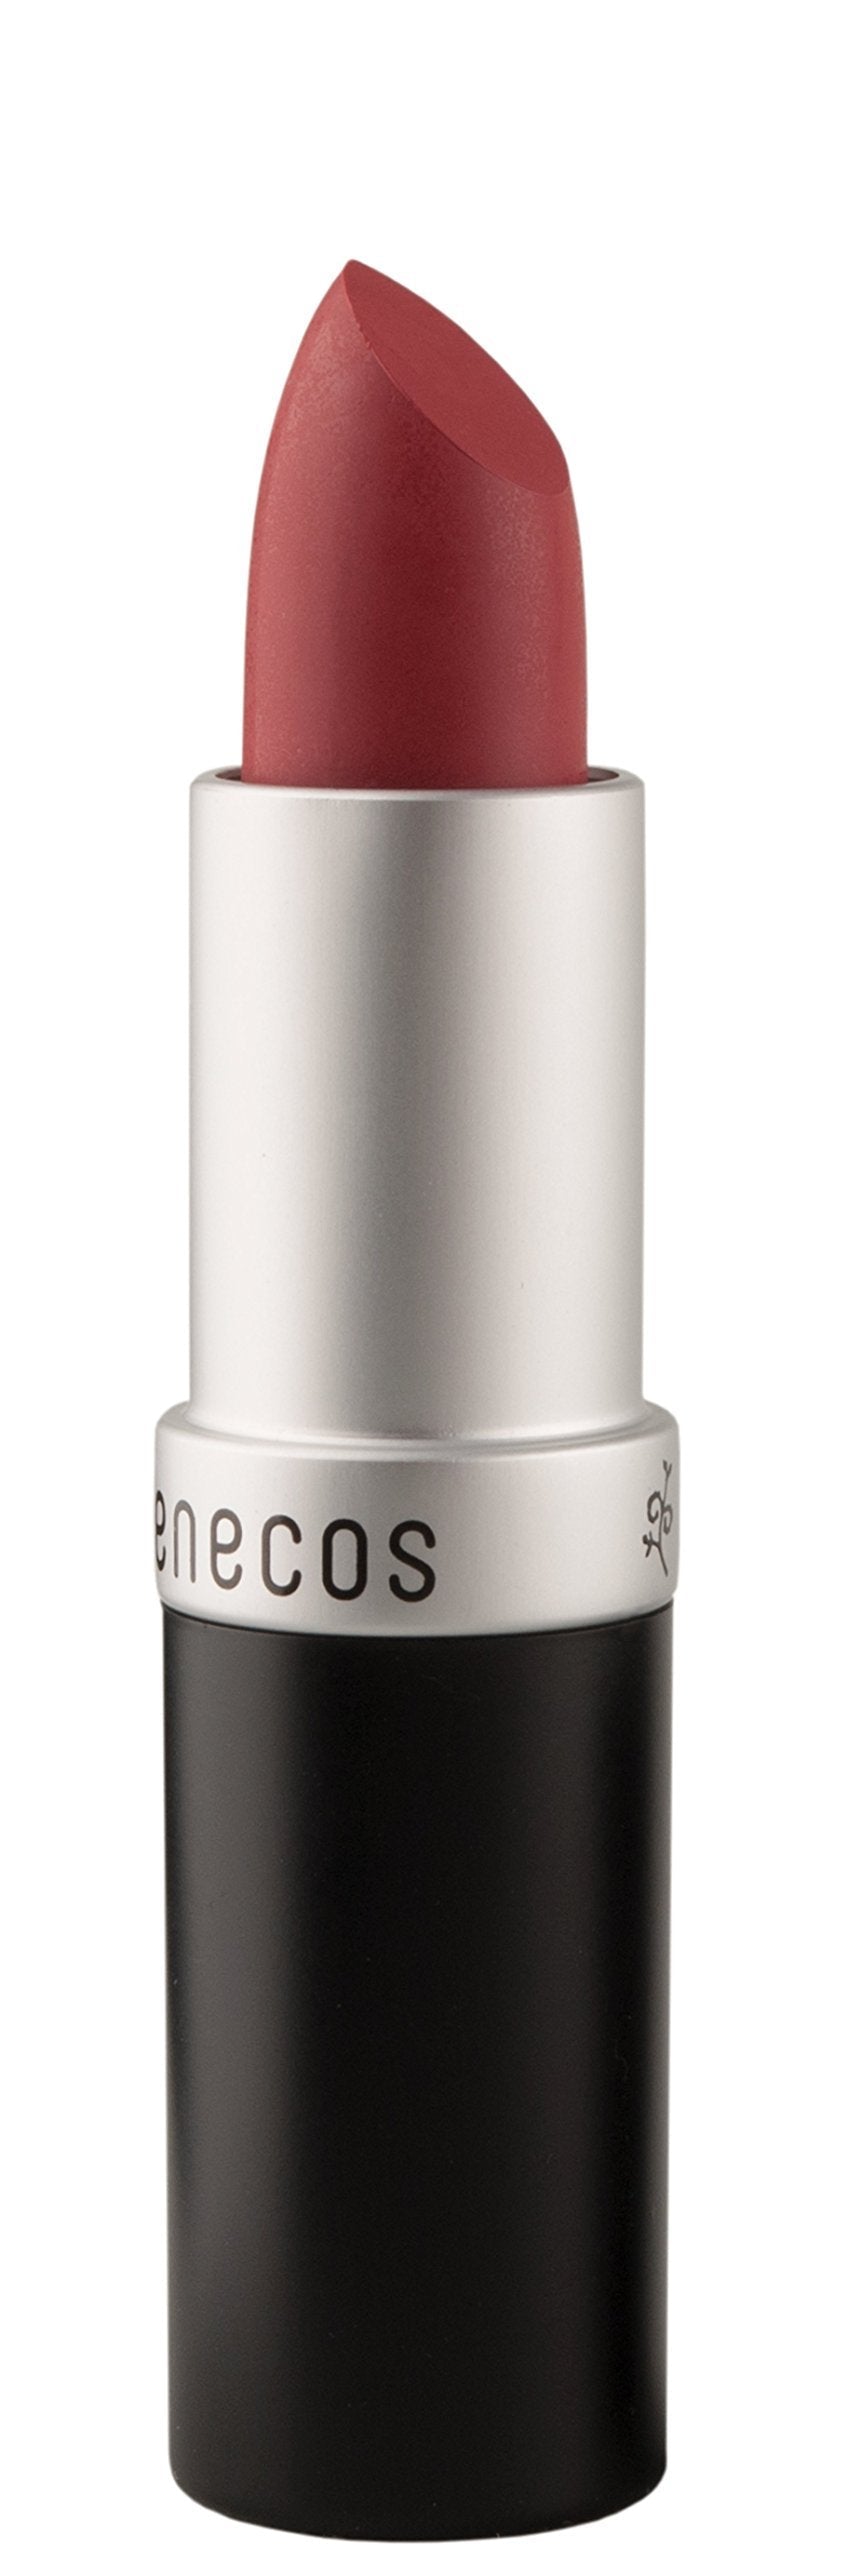 Benecos Natural Matte Lipstick in Dark Pink/Red Shade - Long-Lasting Gorgeous Color, Soft and Smooth Moisturized Lips, Organic, Vegan (WOW!) - BeesActive Australia